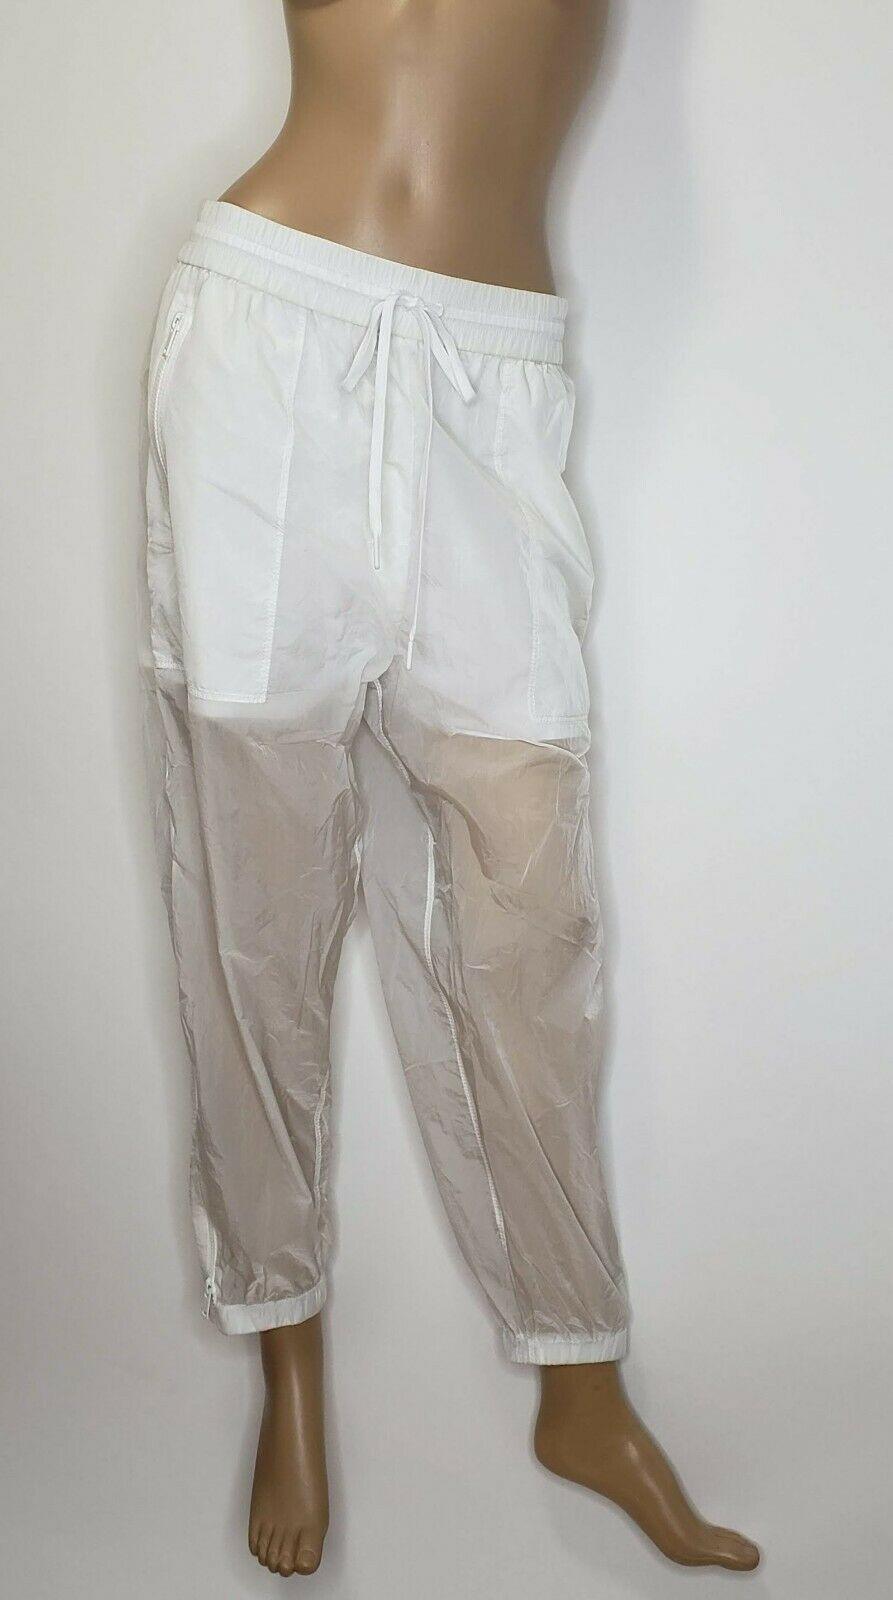 DKNY Pure White Transparent Trousers Casual Streetwear Sport Style Pants Size S - SVNYFancy